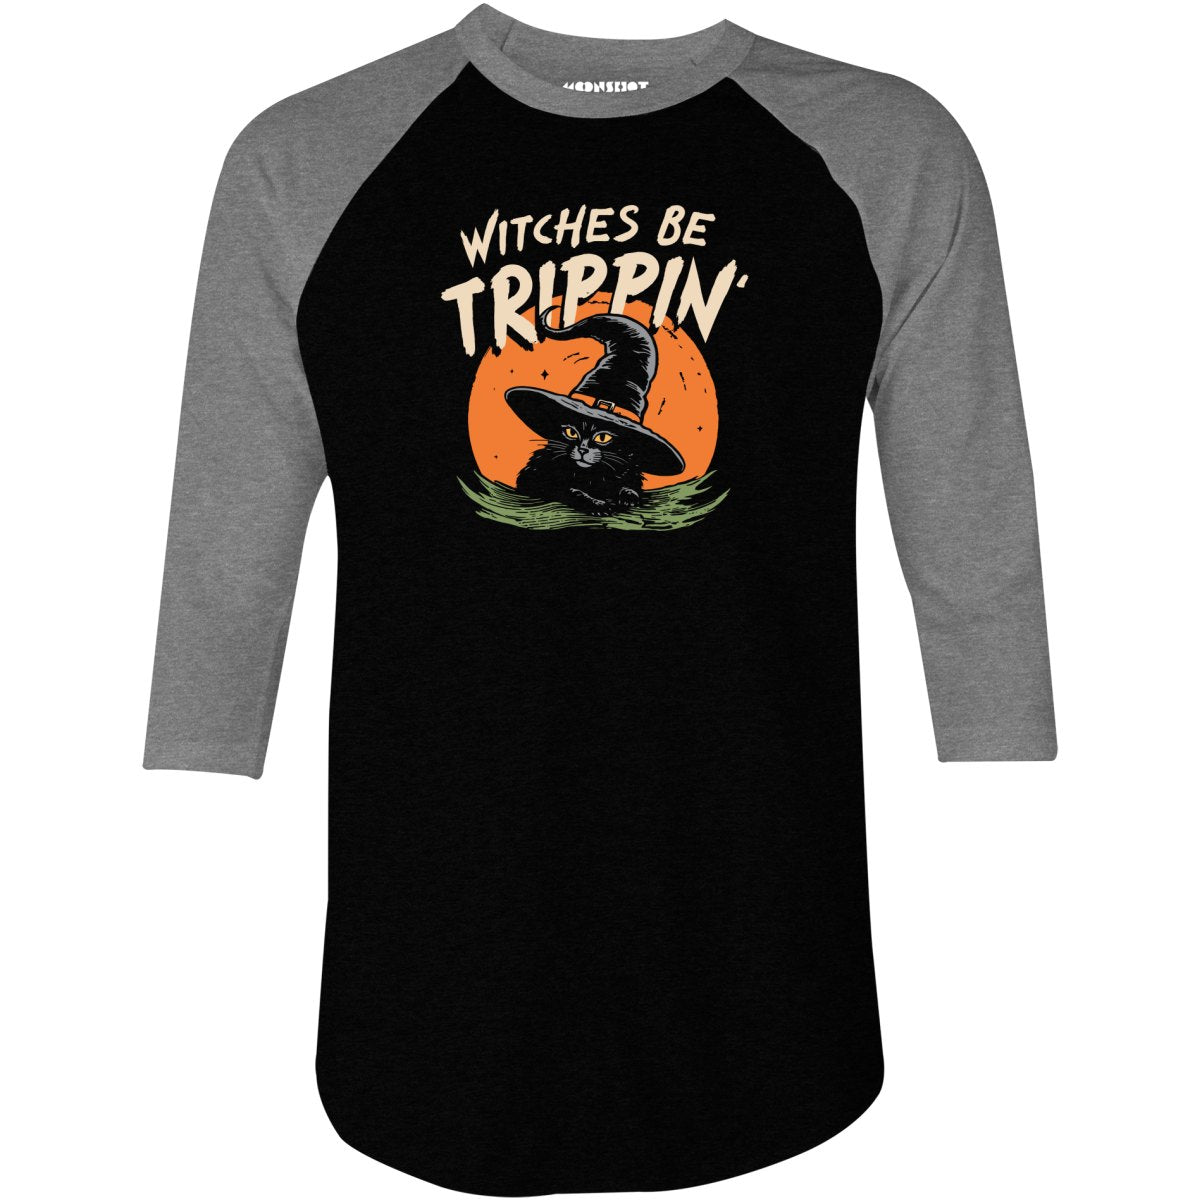 Witches Be Trippin' - 3/4 Sleeve Raglan T-Shirt